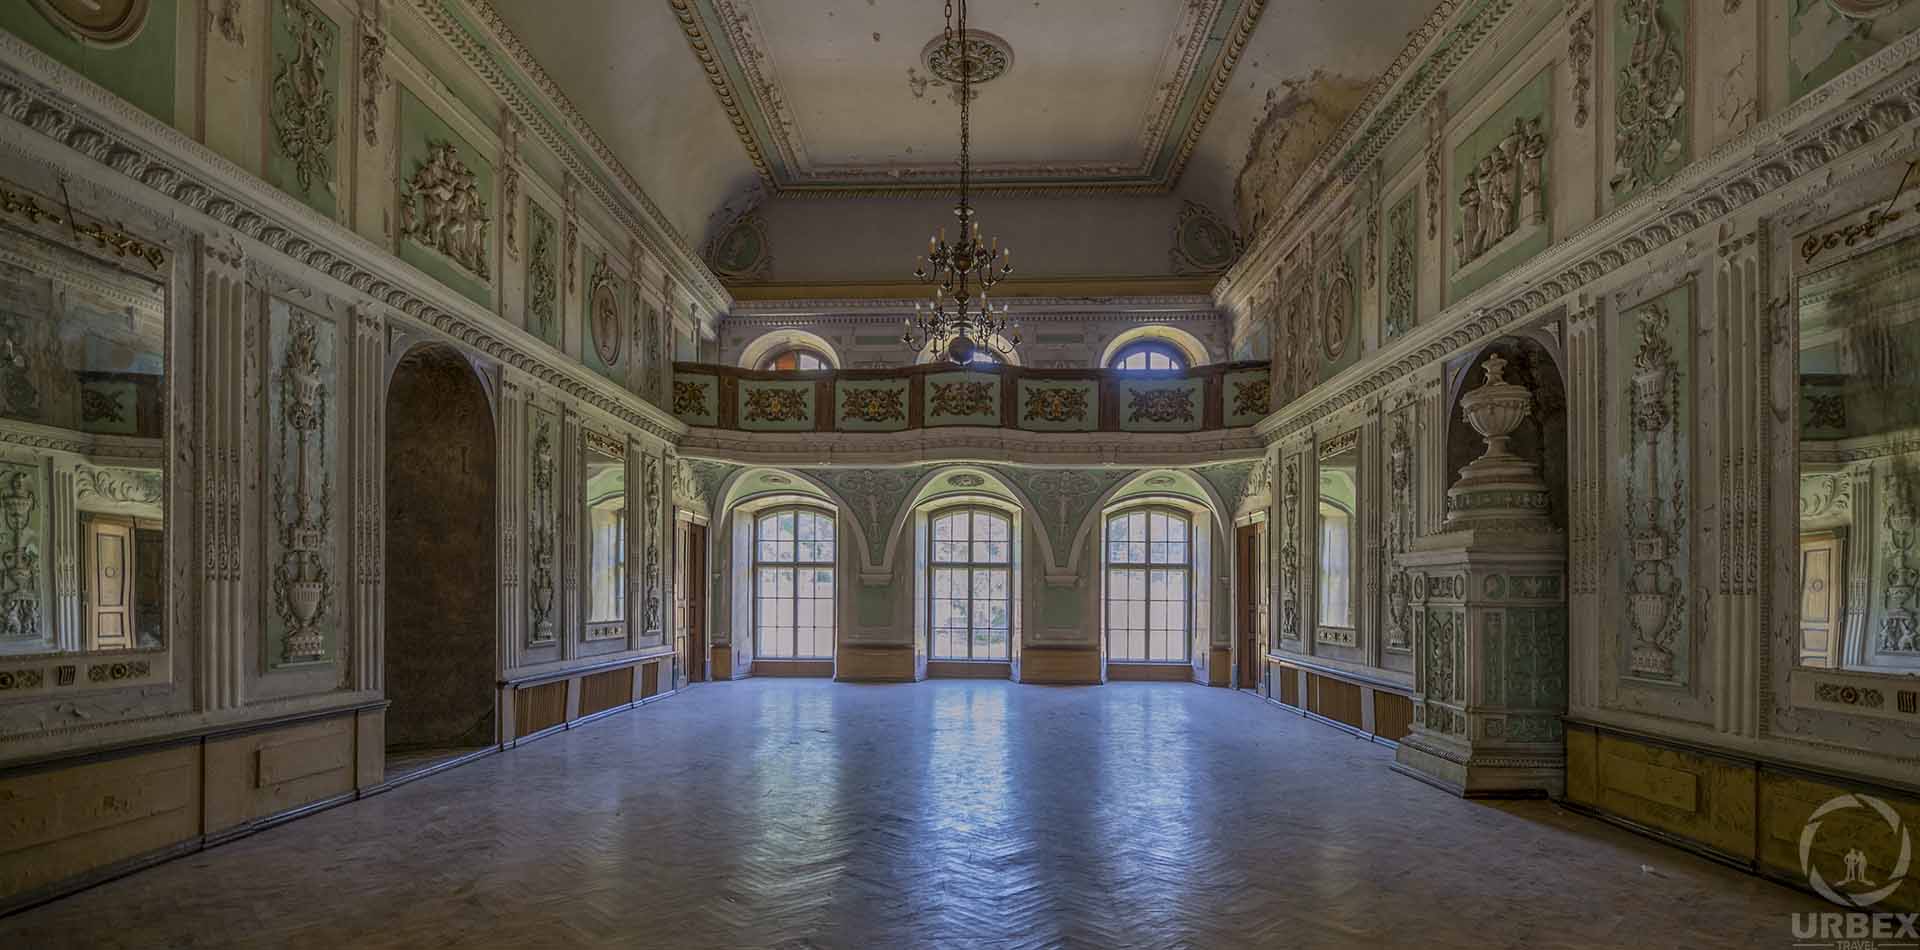 Lost Splendor: Haunting Charms of Bożków's Abandoned Palace